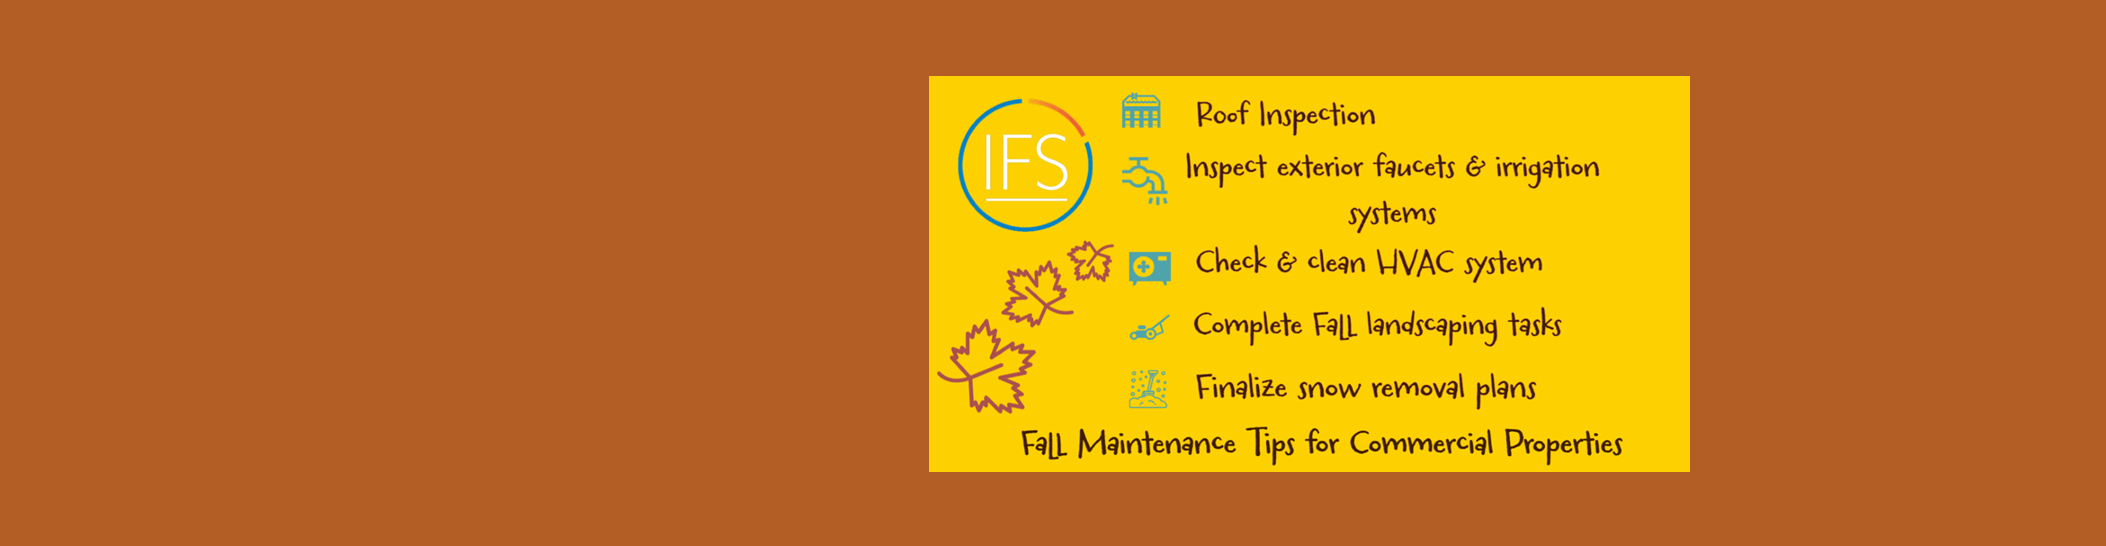 Fall Mainteance Tips for Commercial Facilities